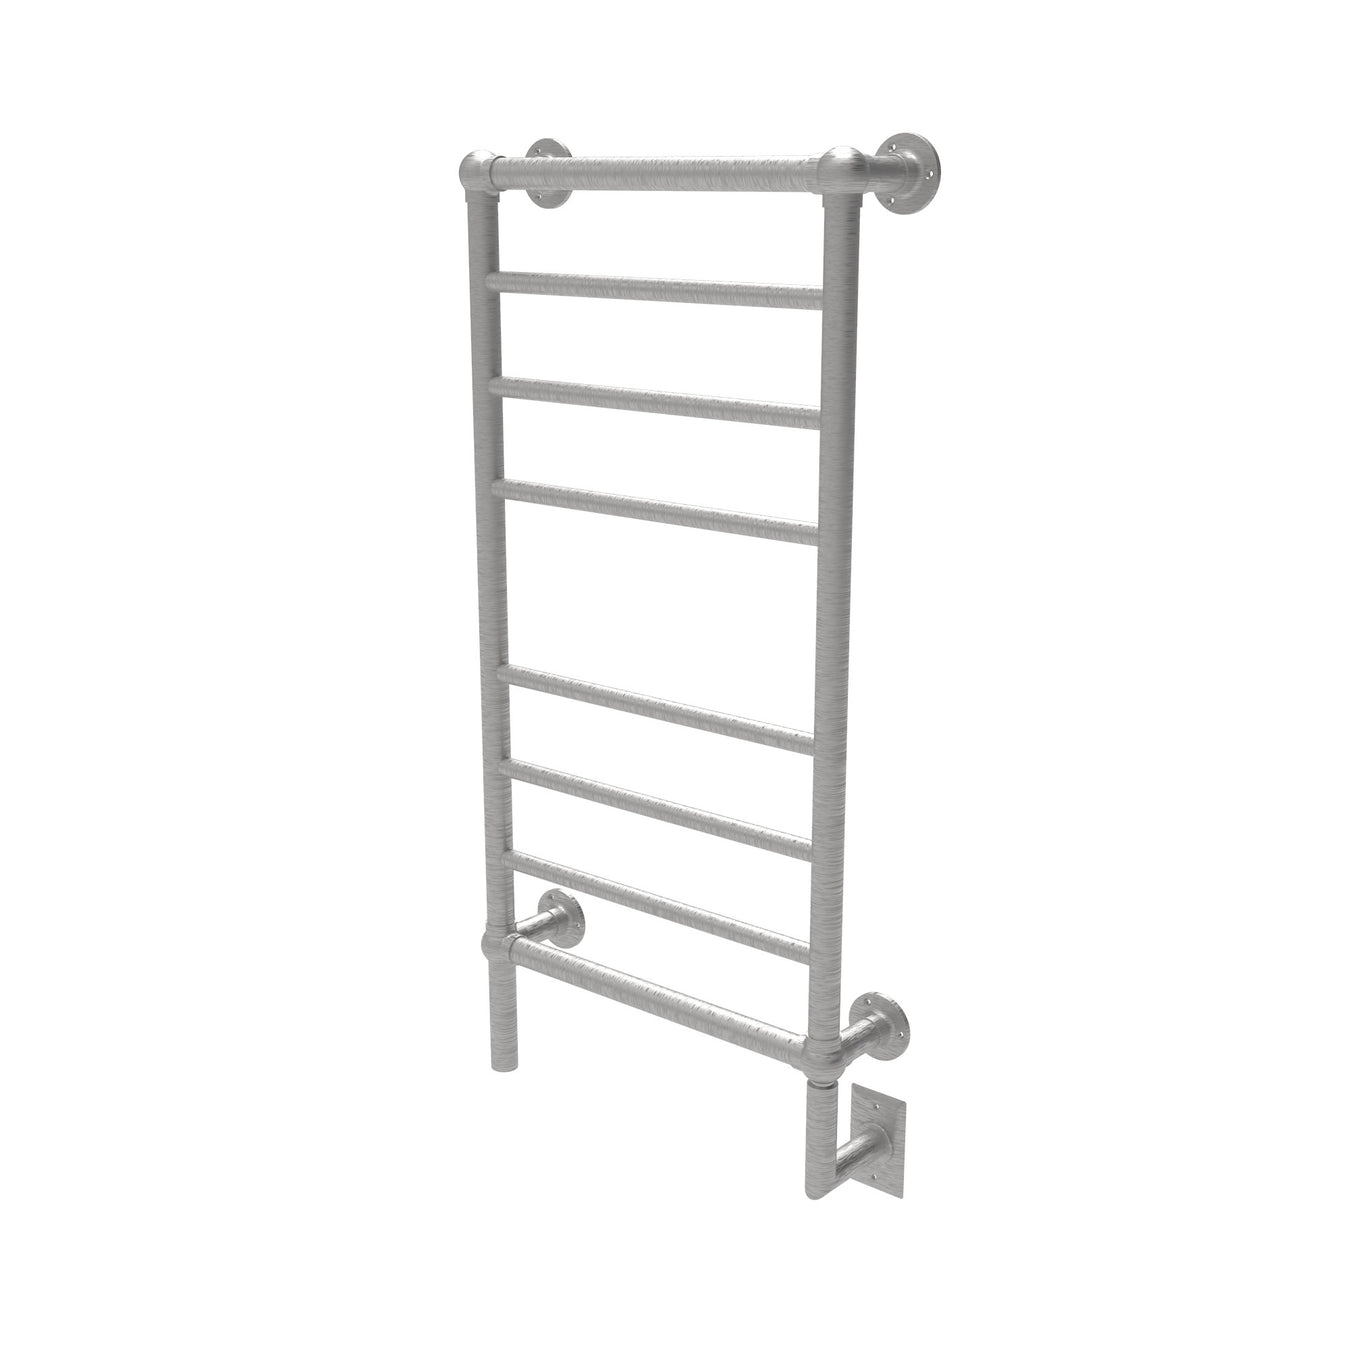 Amba Products Traditional Collection T-2040 Towel Warmers